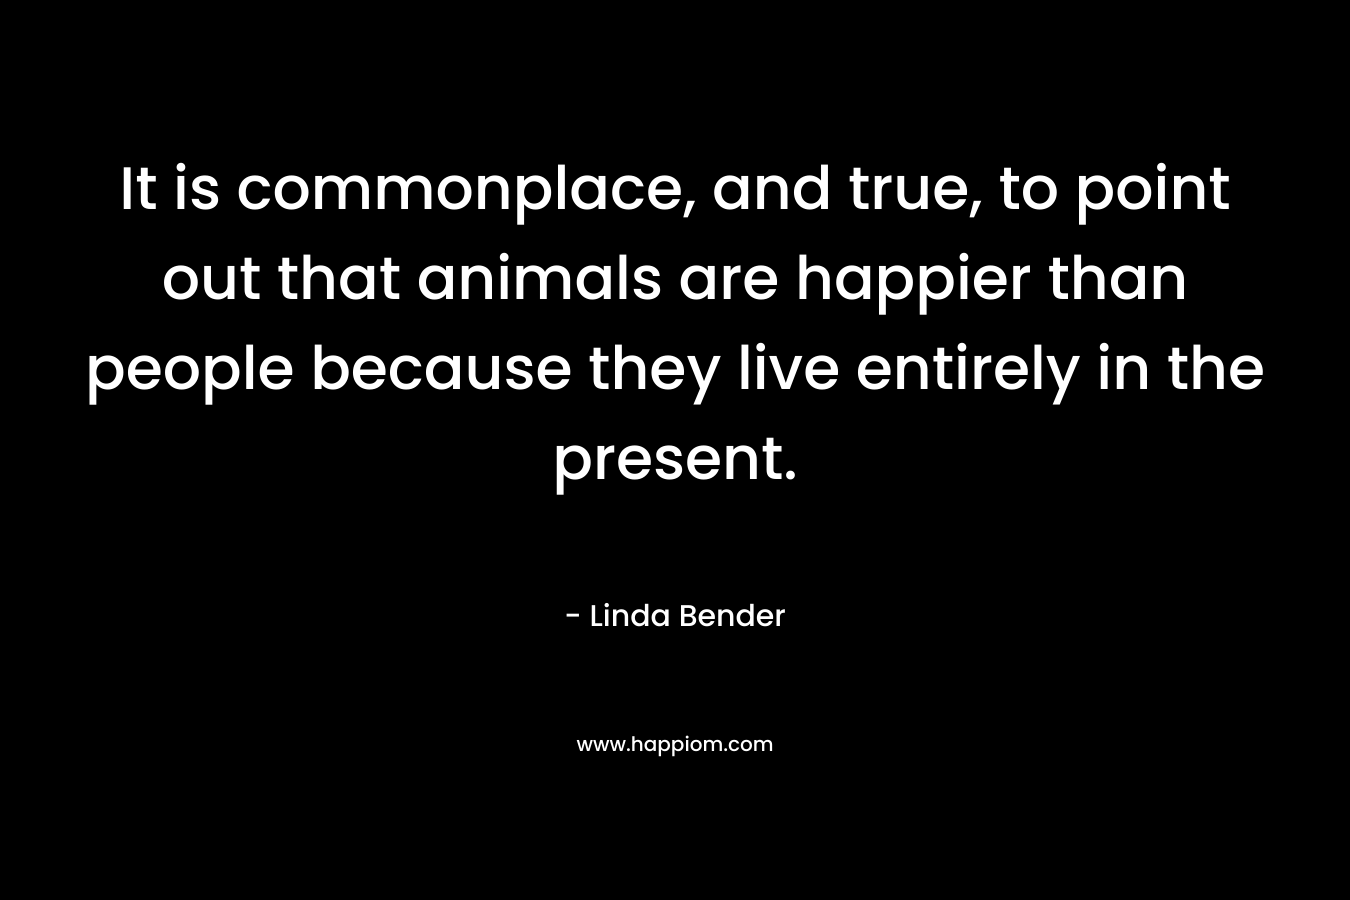 It is commonplace, and true, to point out that animals are happier than people because they live entirely in the present. – Linda Bender